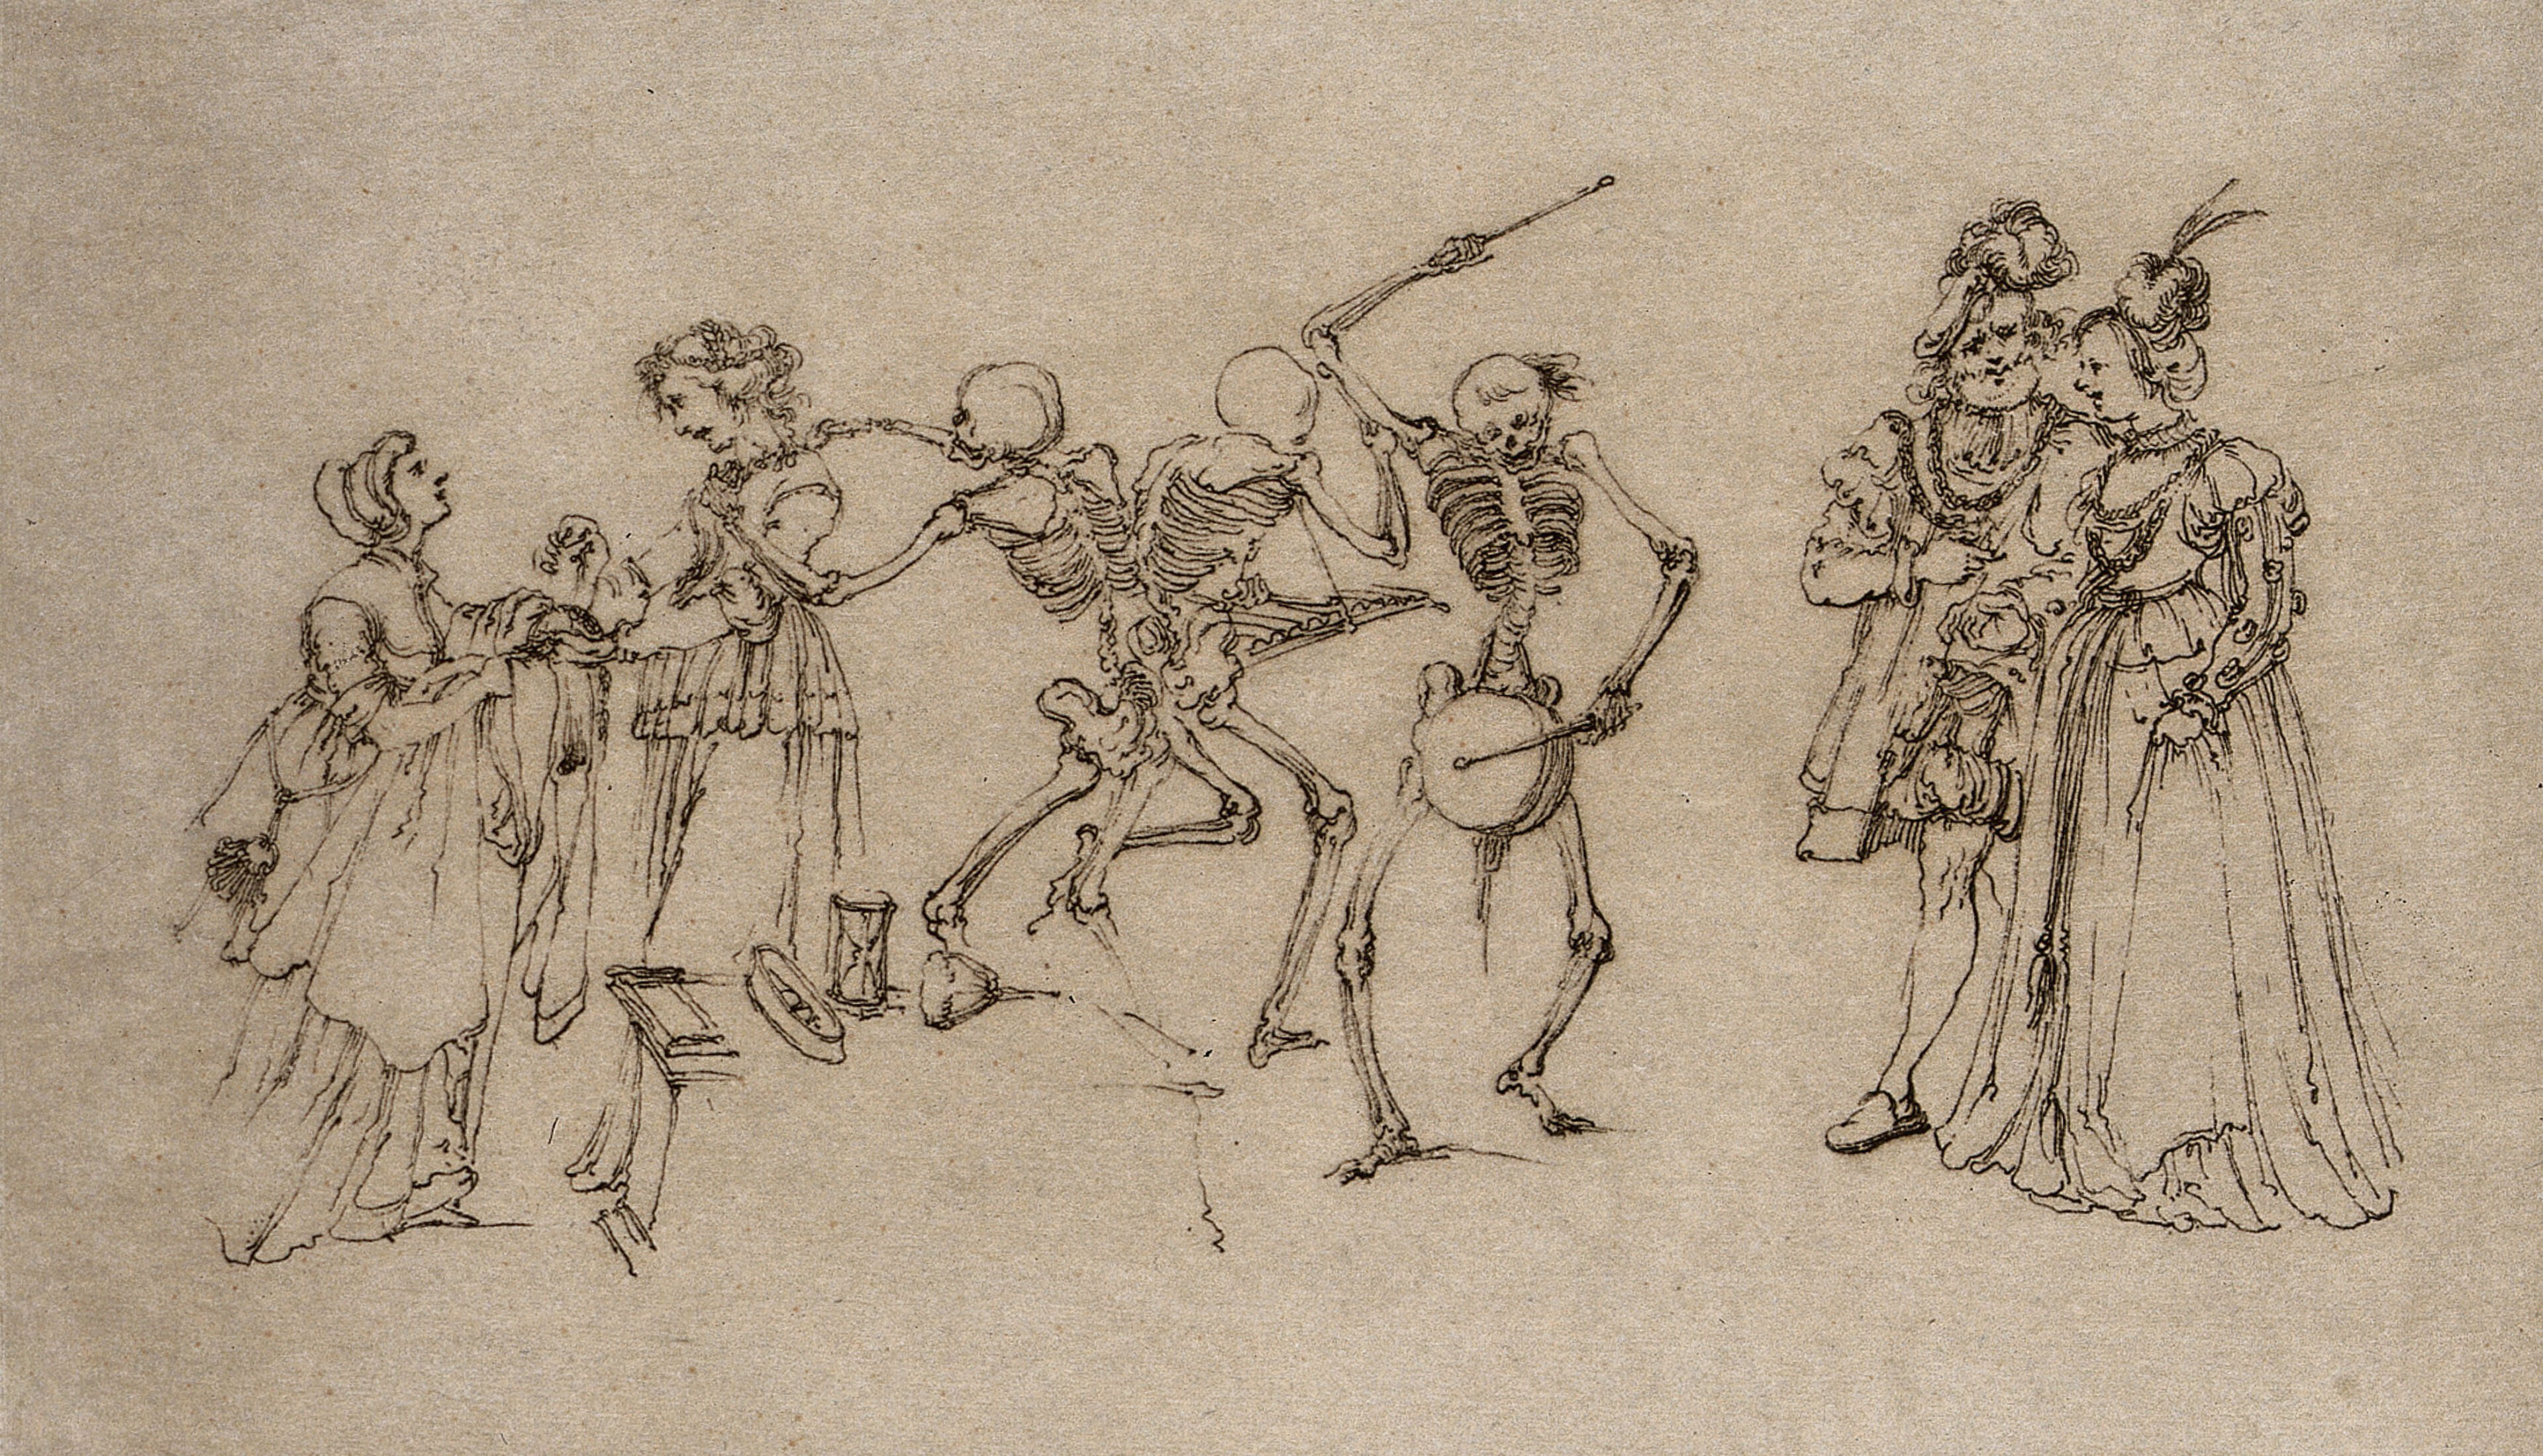 Dance of death: three music-making and dancing skeletons flanked by two women on the left and a couple on the right. Etching.